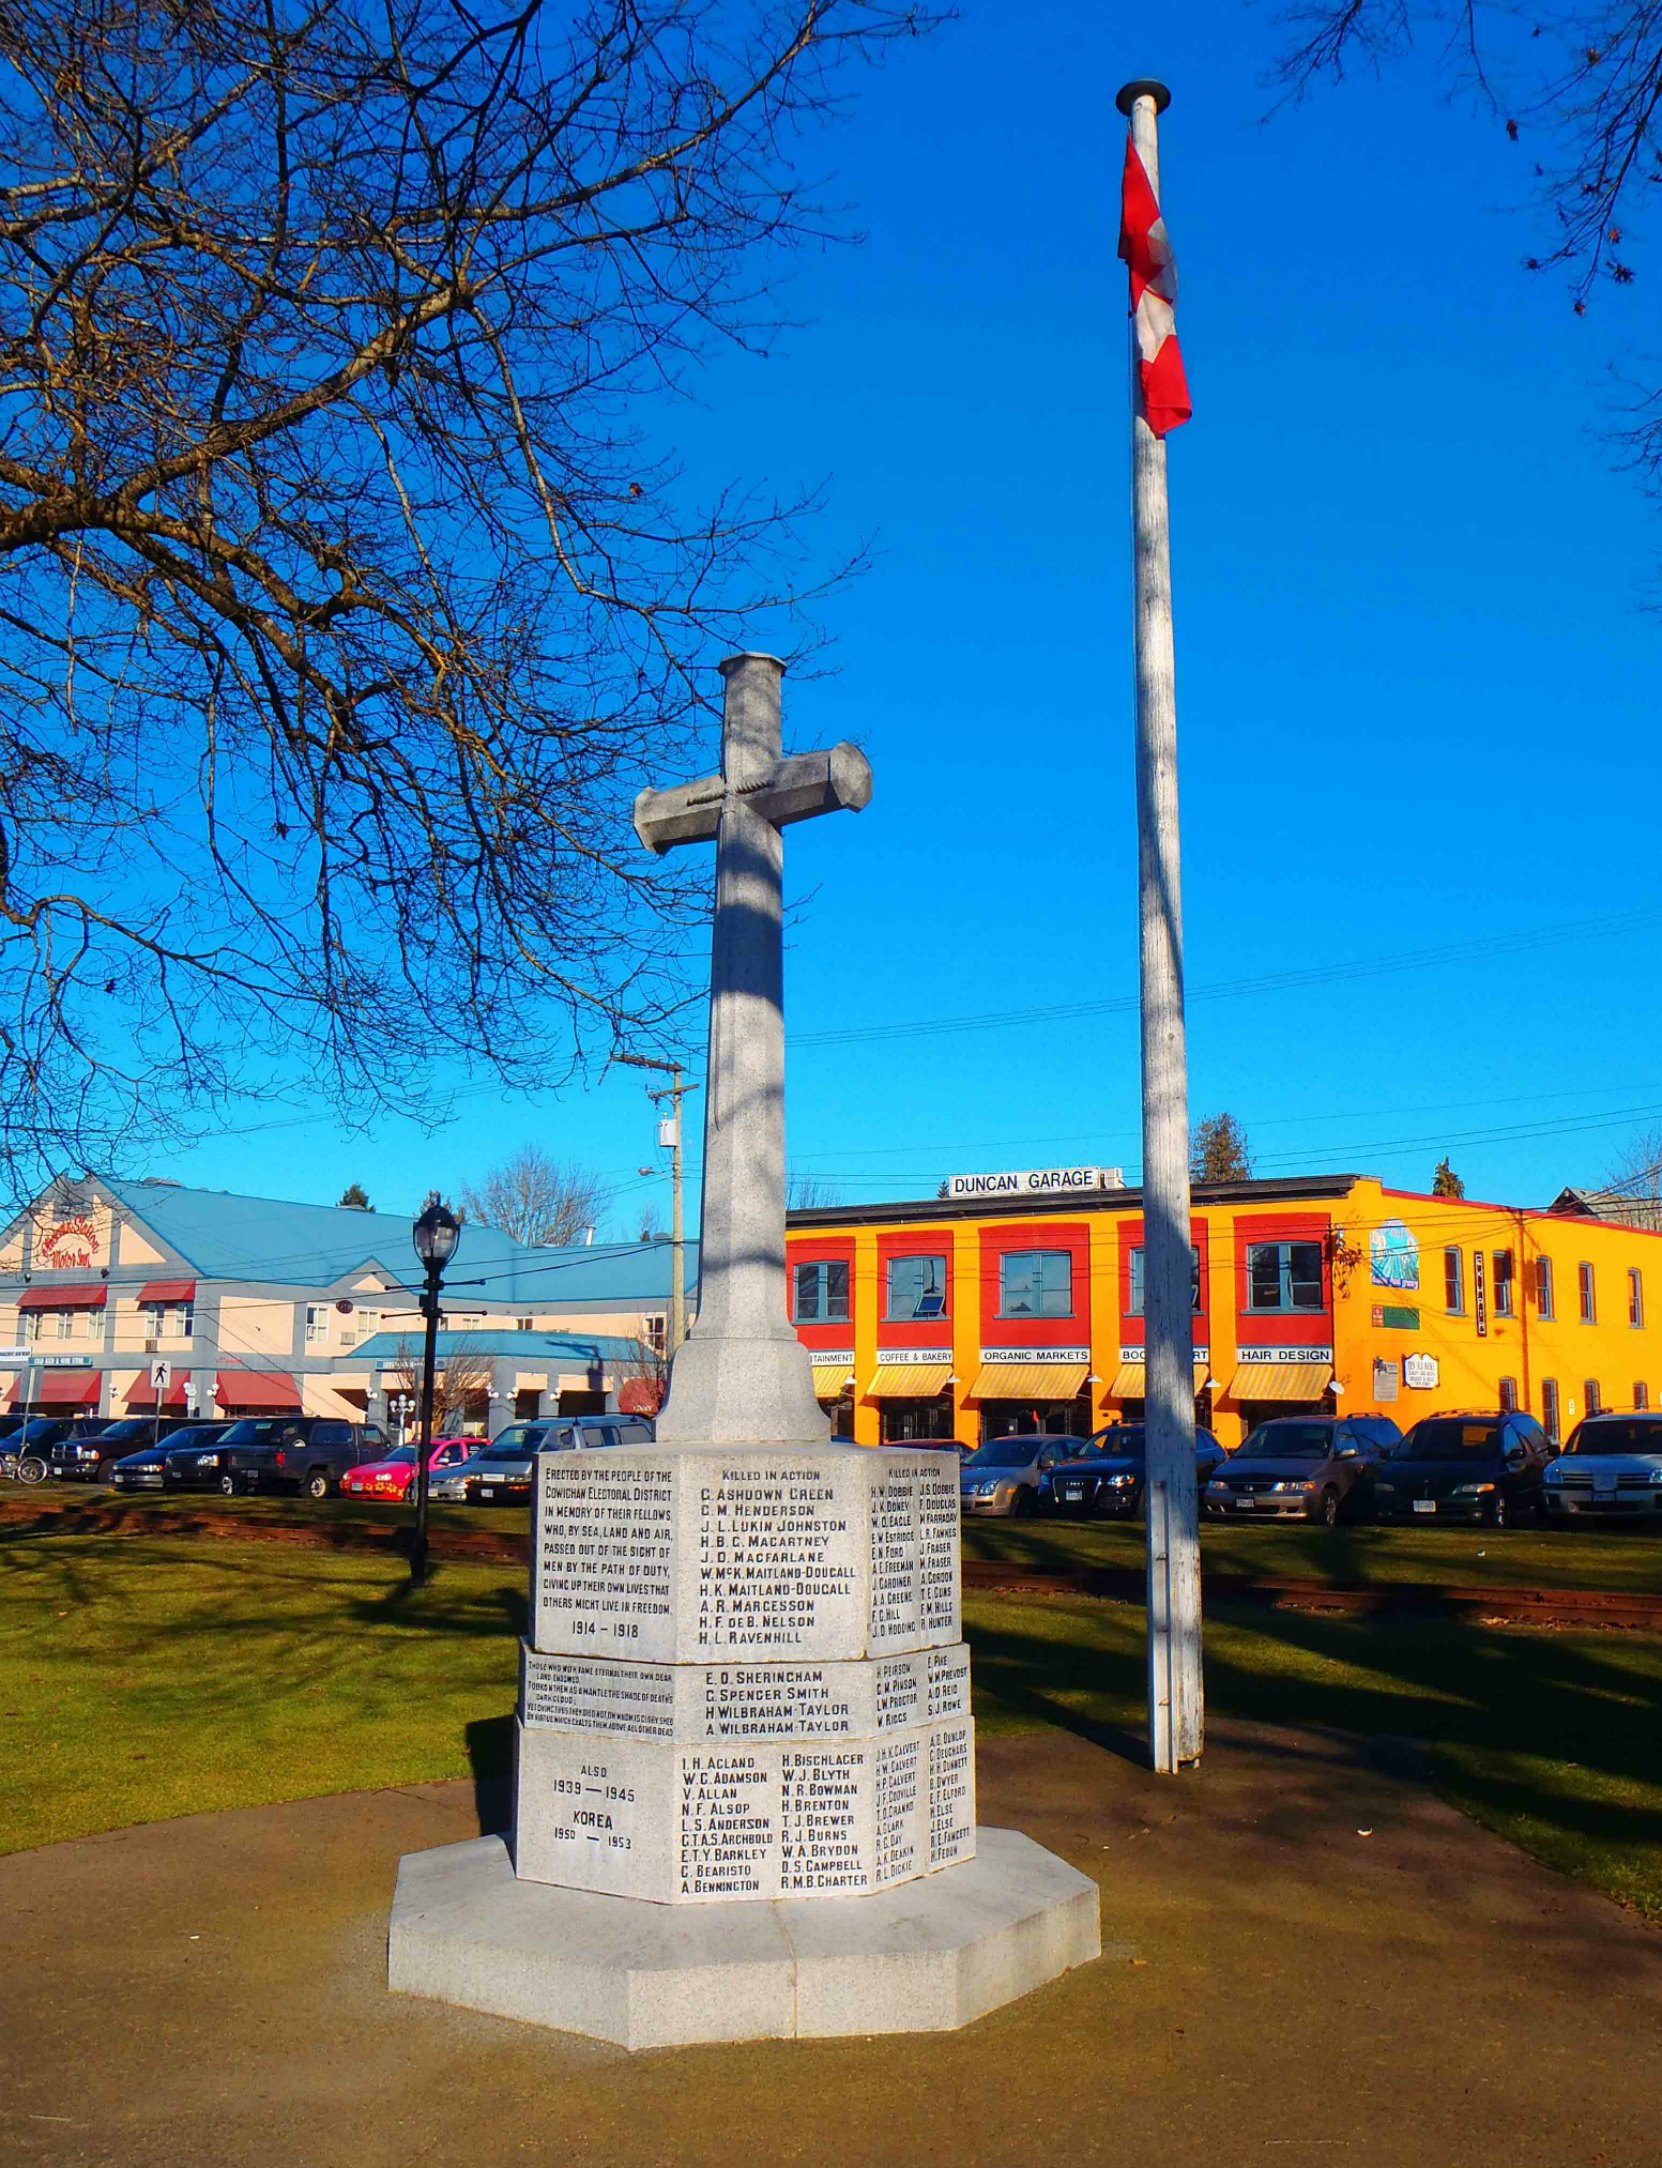 Cenotaph, Charles Hoey Park, Duncan, B.C. The names of four Brethren of Temple Lodge, No.33 appear on the Cenotaph.